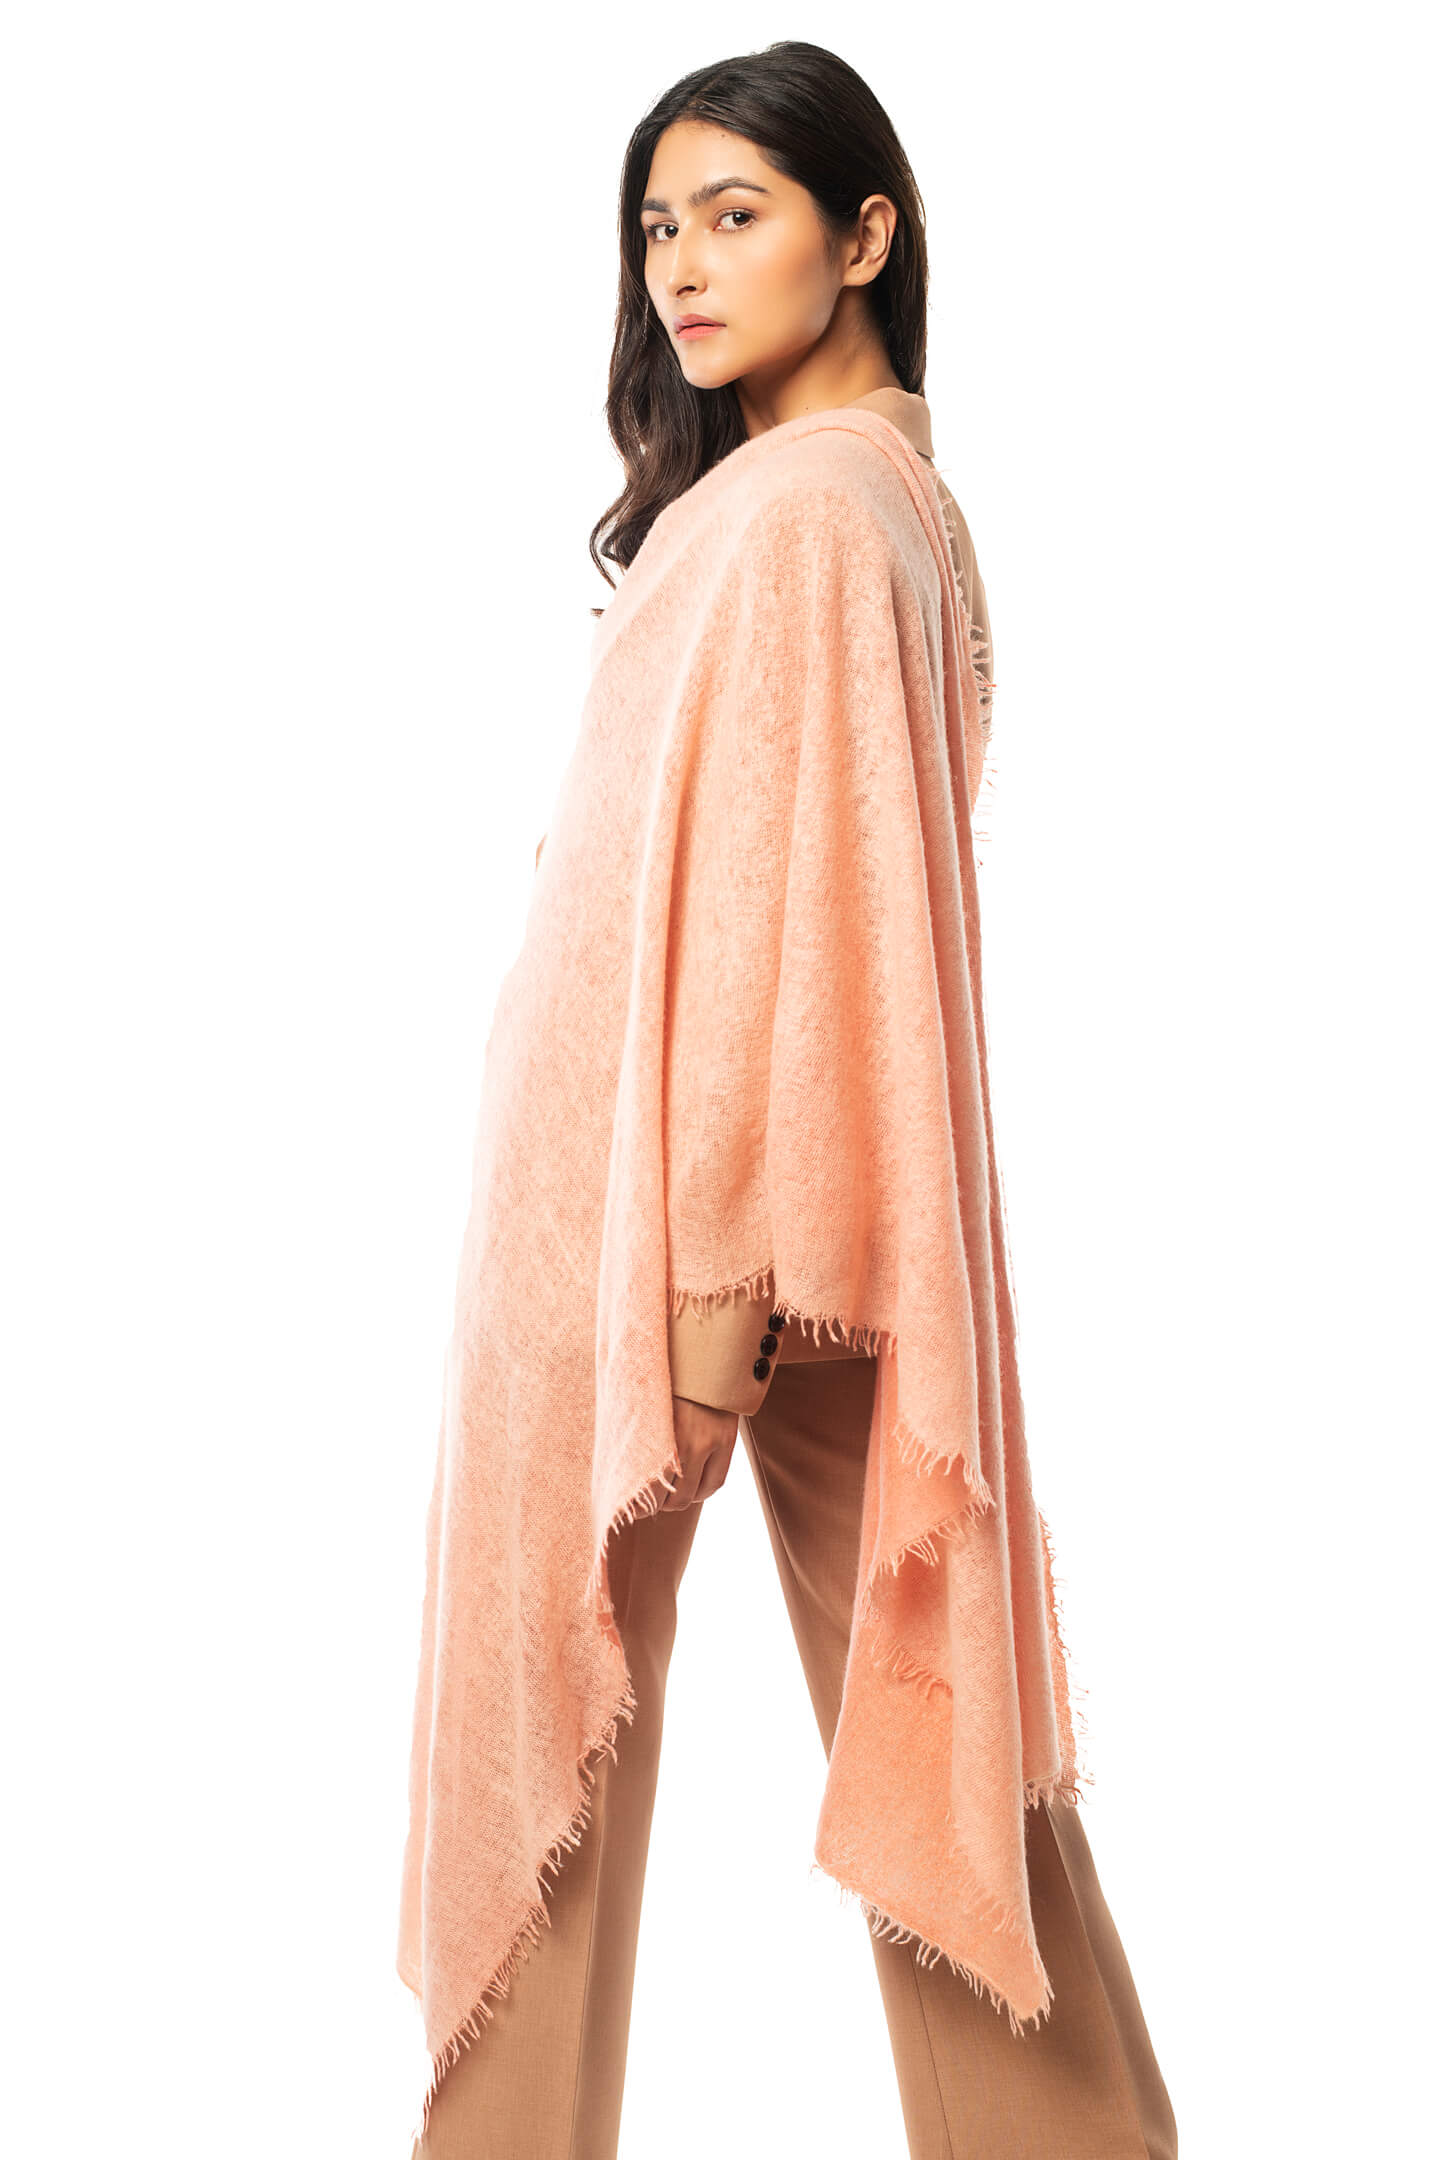 Light Salmon Cashmere Scarf Hand Knitted & Felted Evokes Powerful Sense of Hope, Health, Vitality, and Persistence.